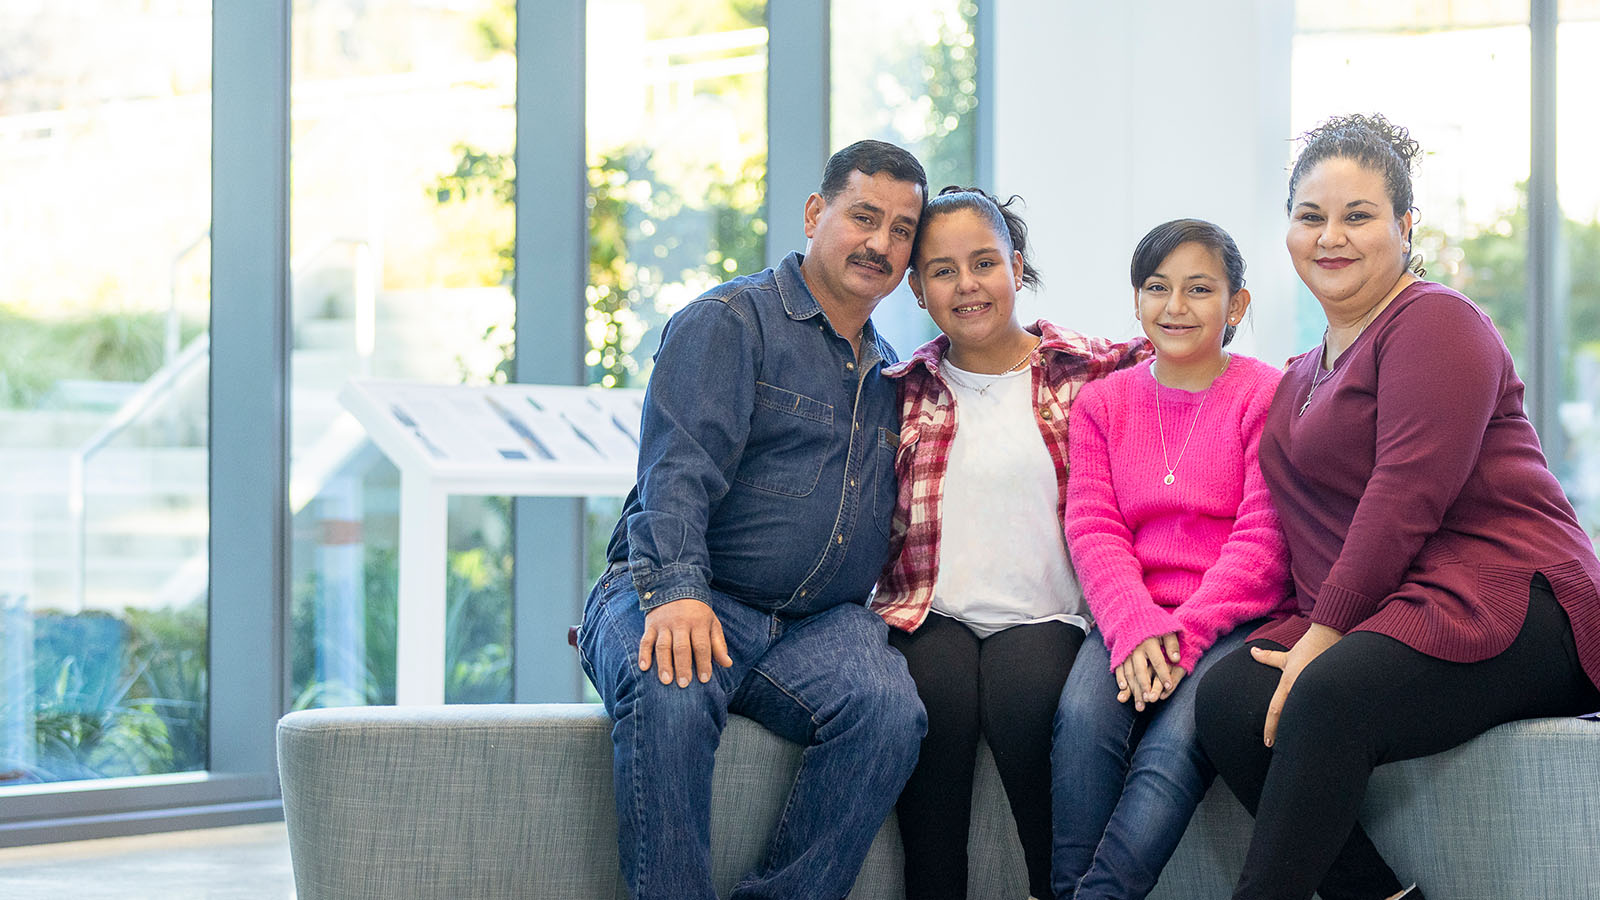 The Medina-Lamas family sits together on a gray bench at Seattle Children’s Hospital and smile at the camera. Parents Martin and Ana sit on either sides of their two daughters Mary and Monica.